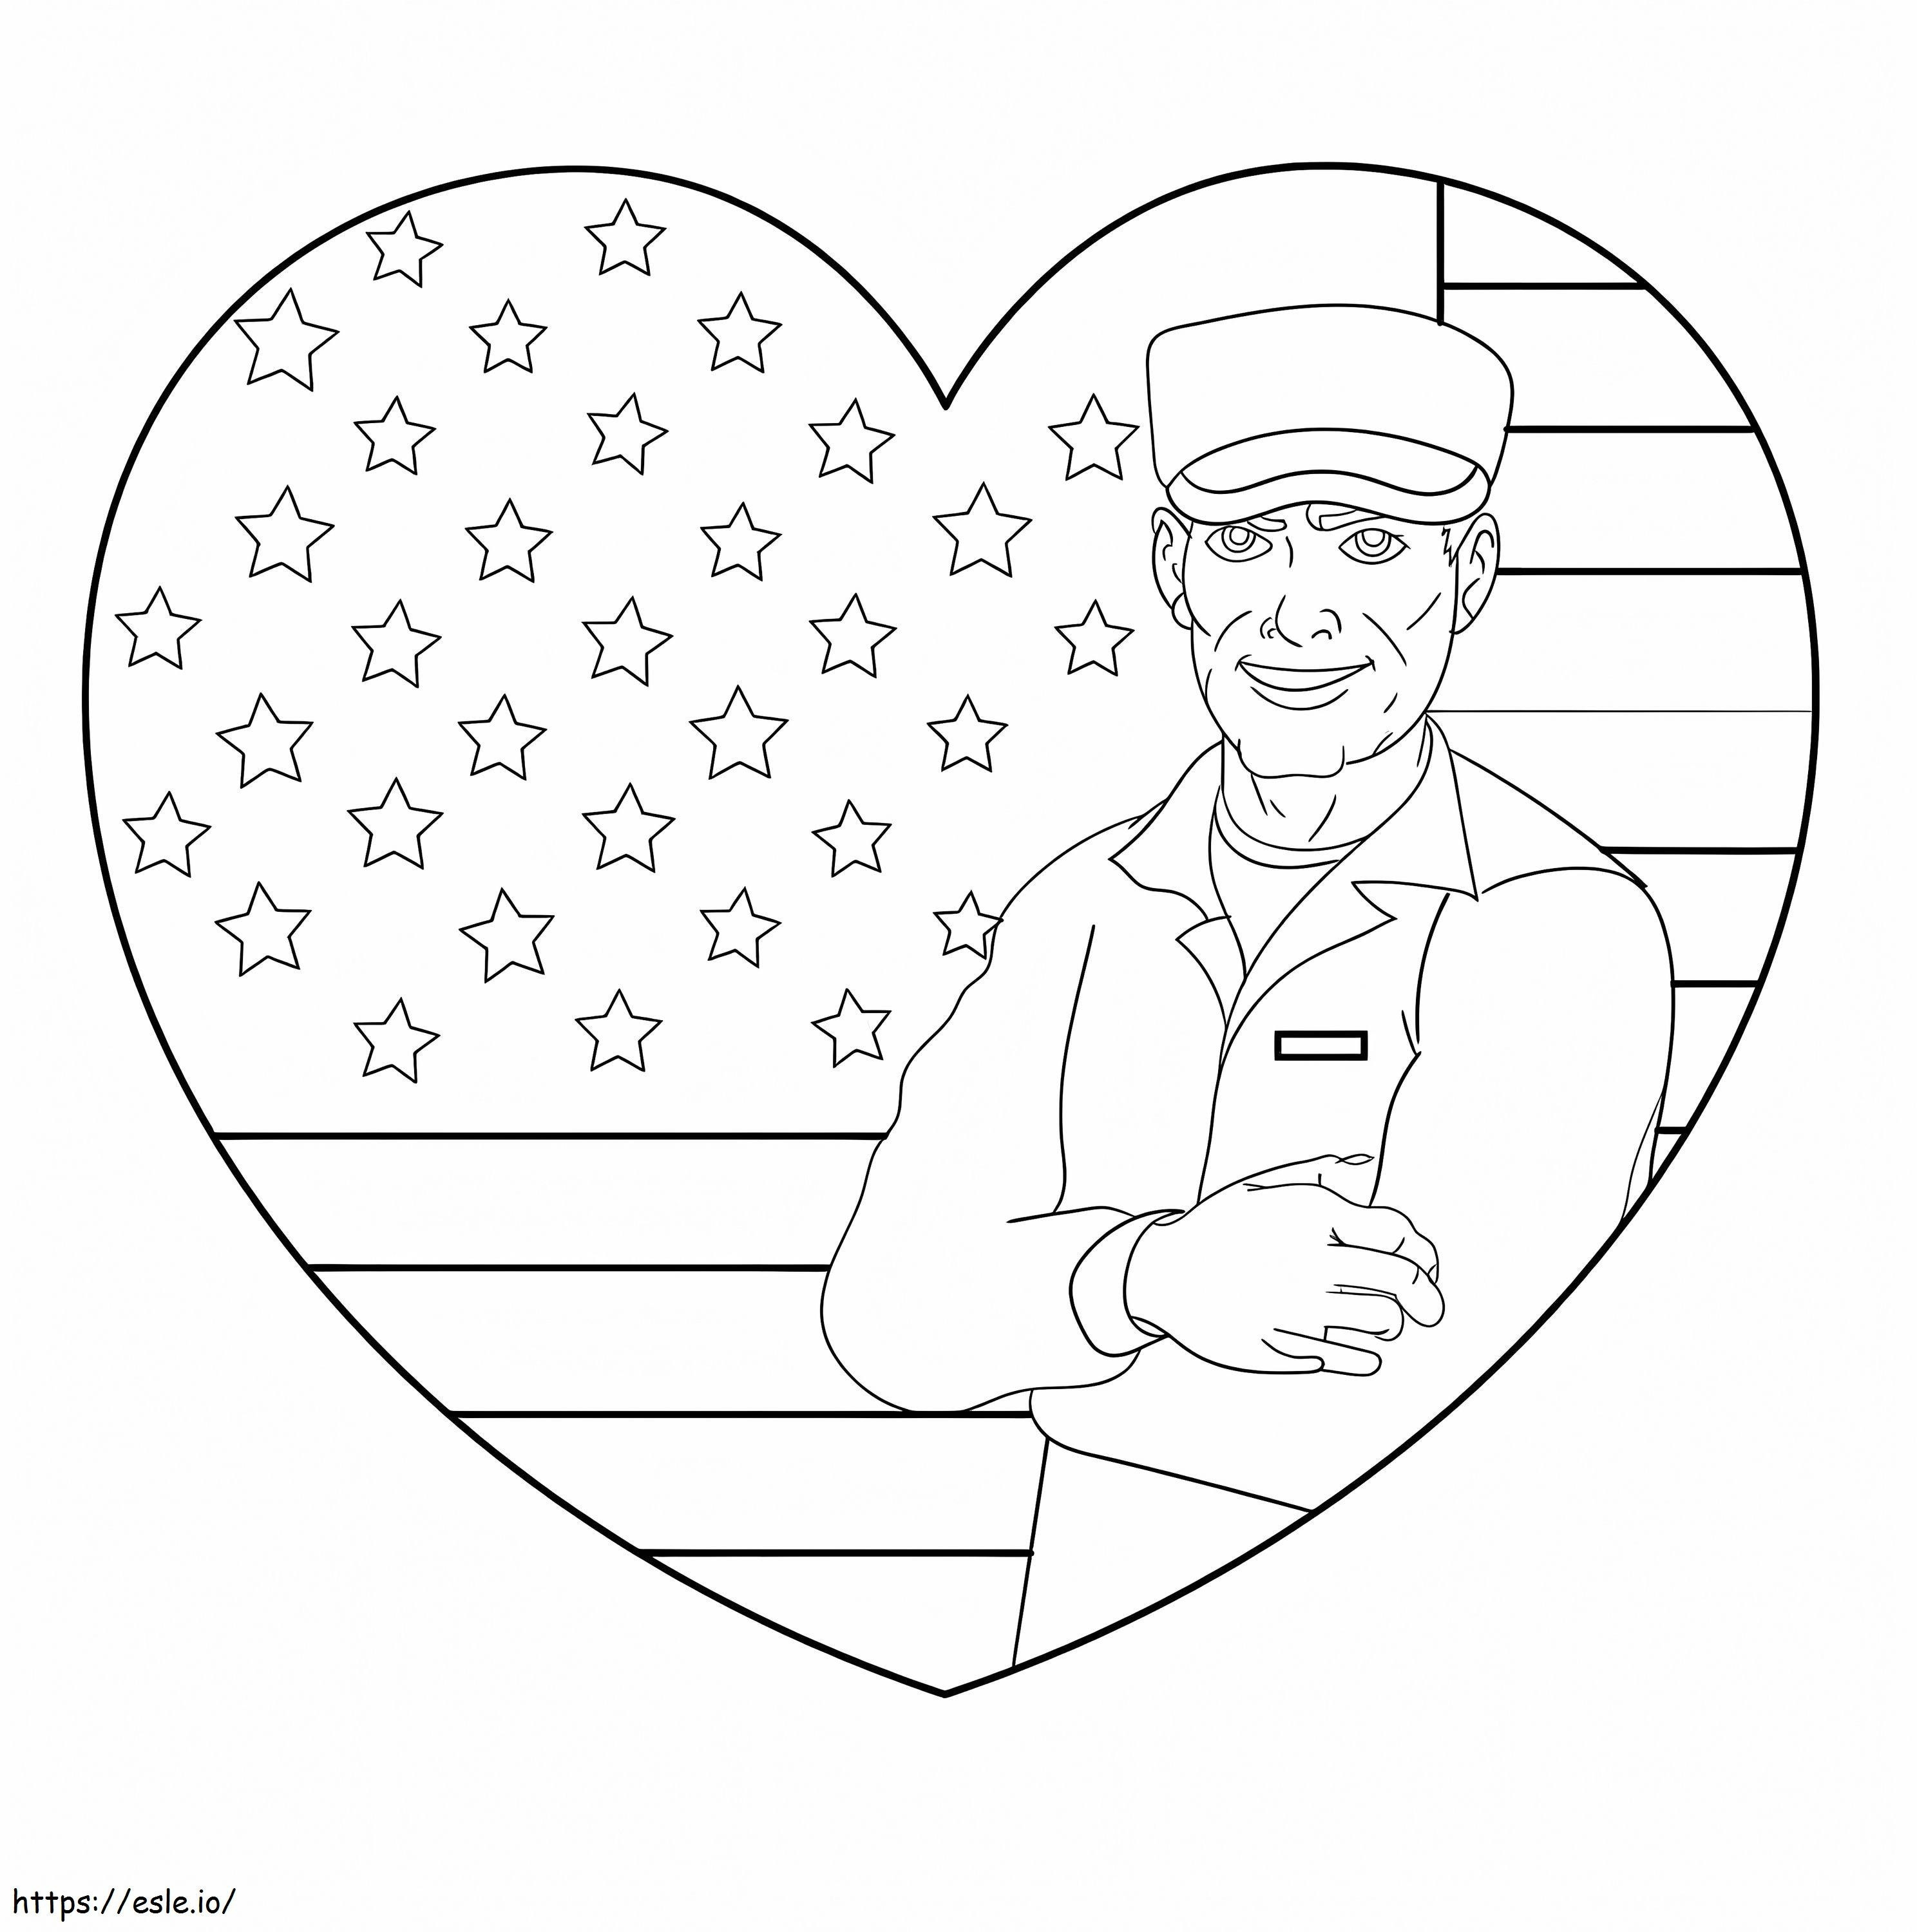 American Soldier coloring page